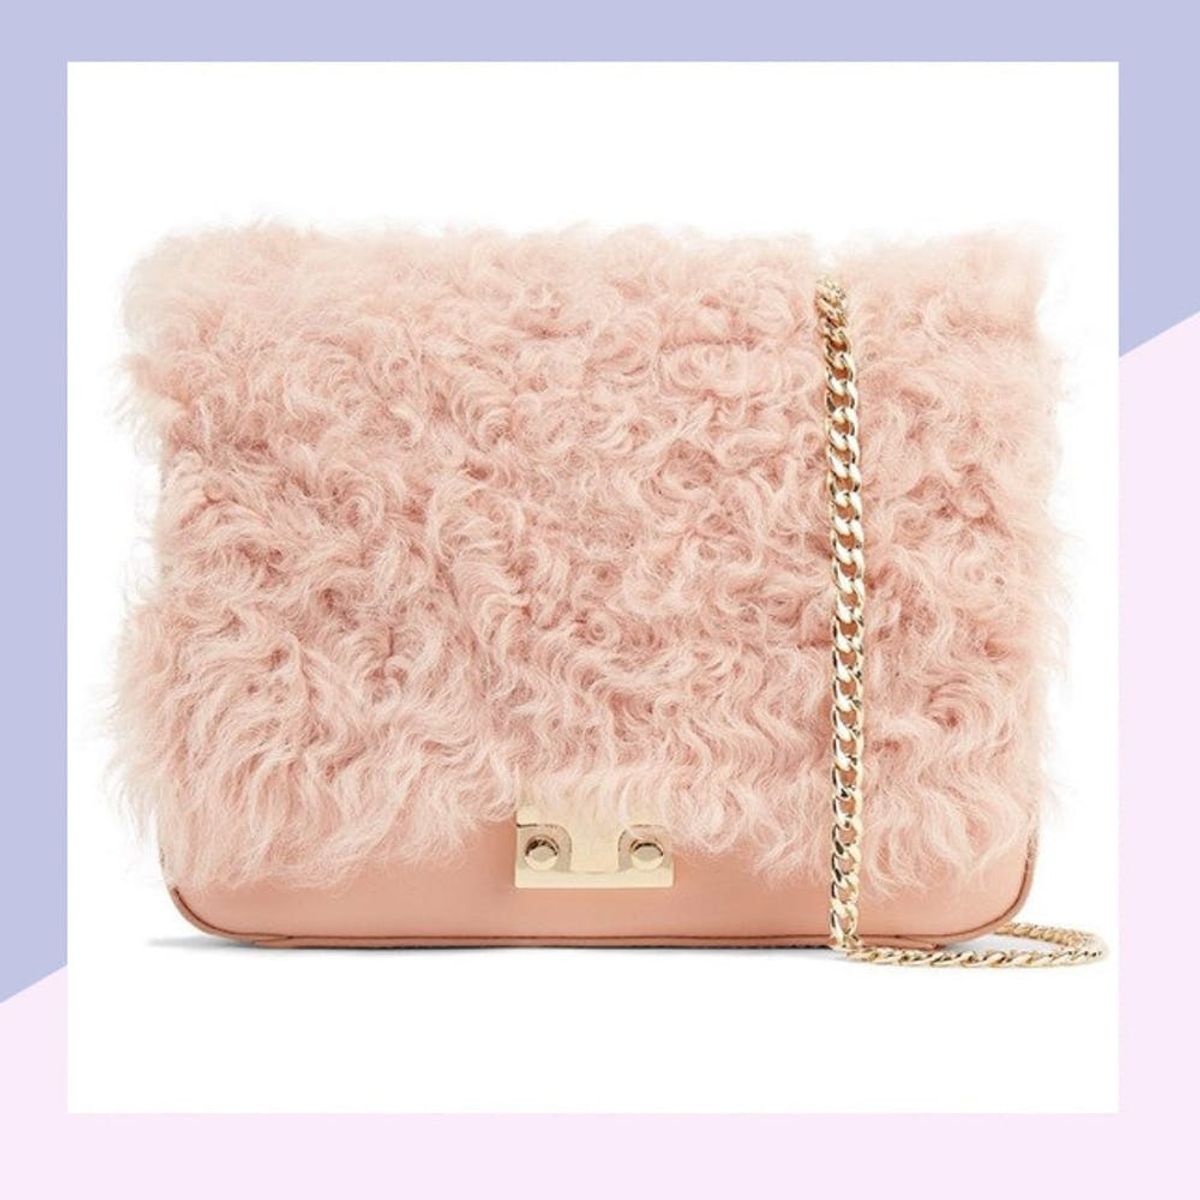 11 Crossbody Bags for Those Busy, On-the-Go Days